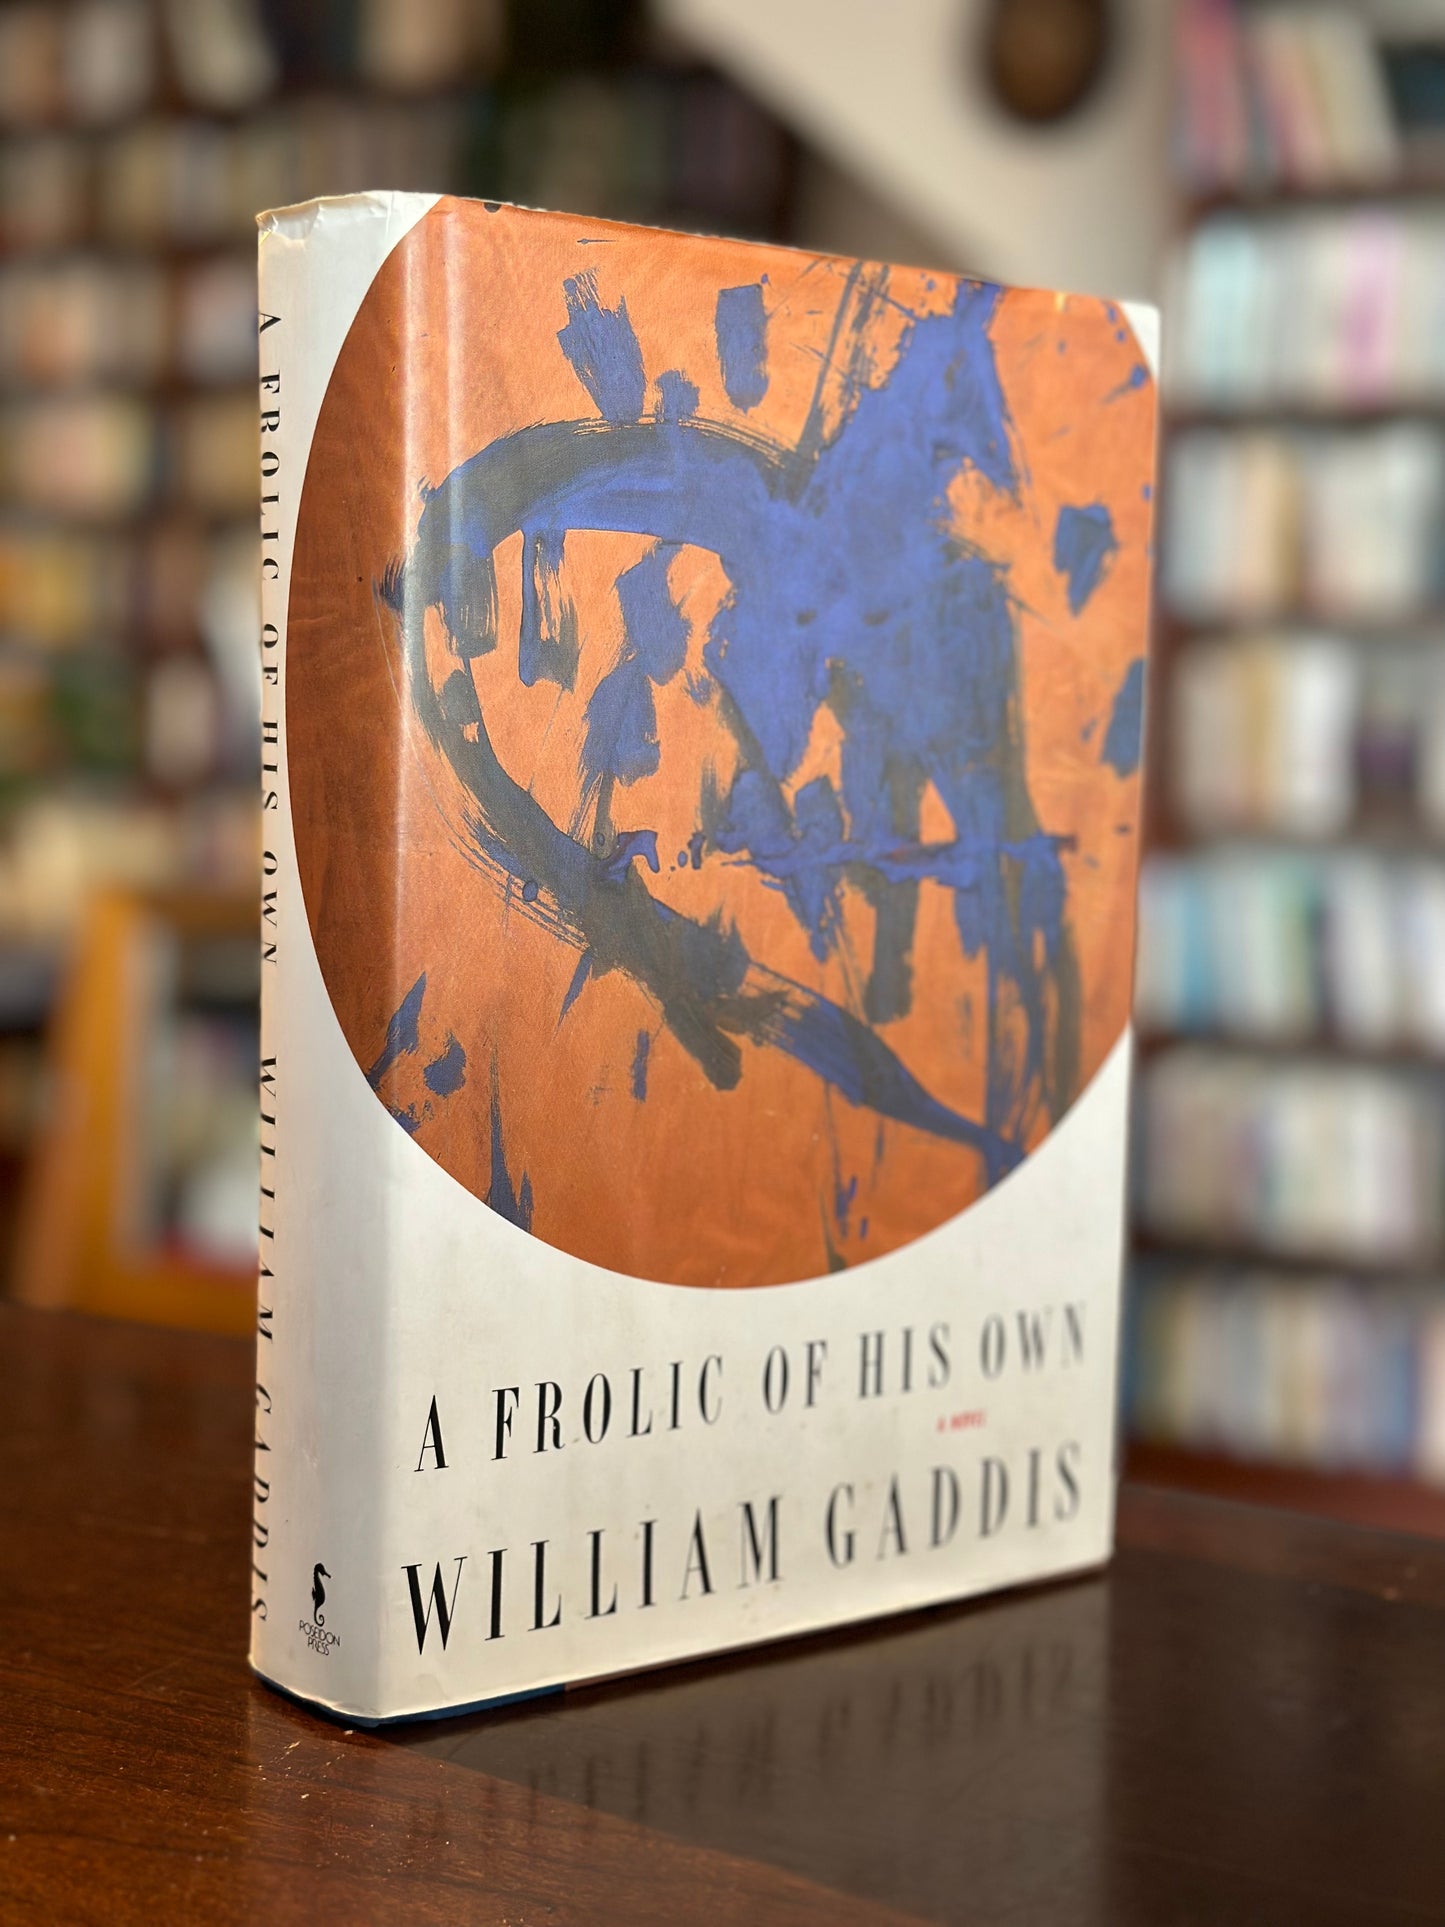 A Frolic of His Own by William Gaddis (First Edition)